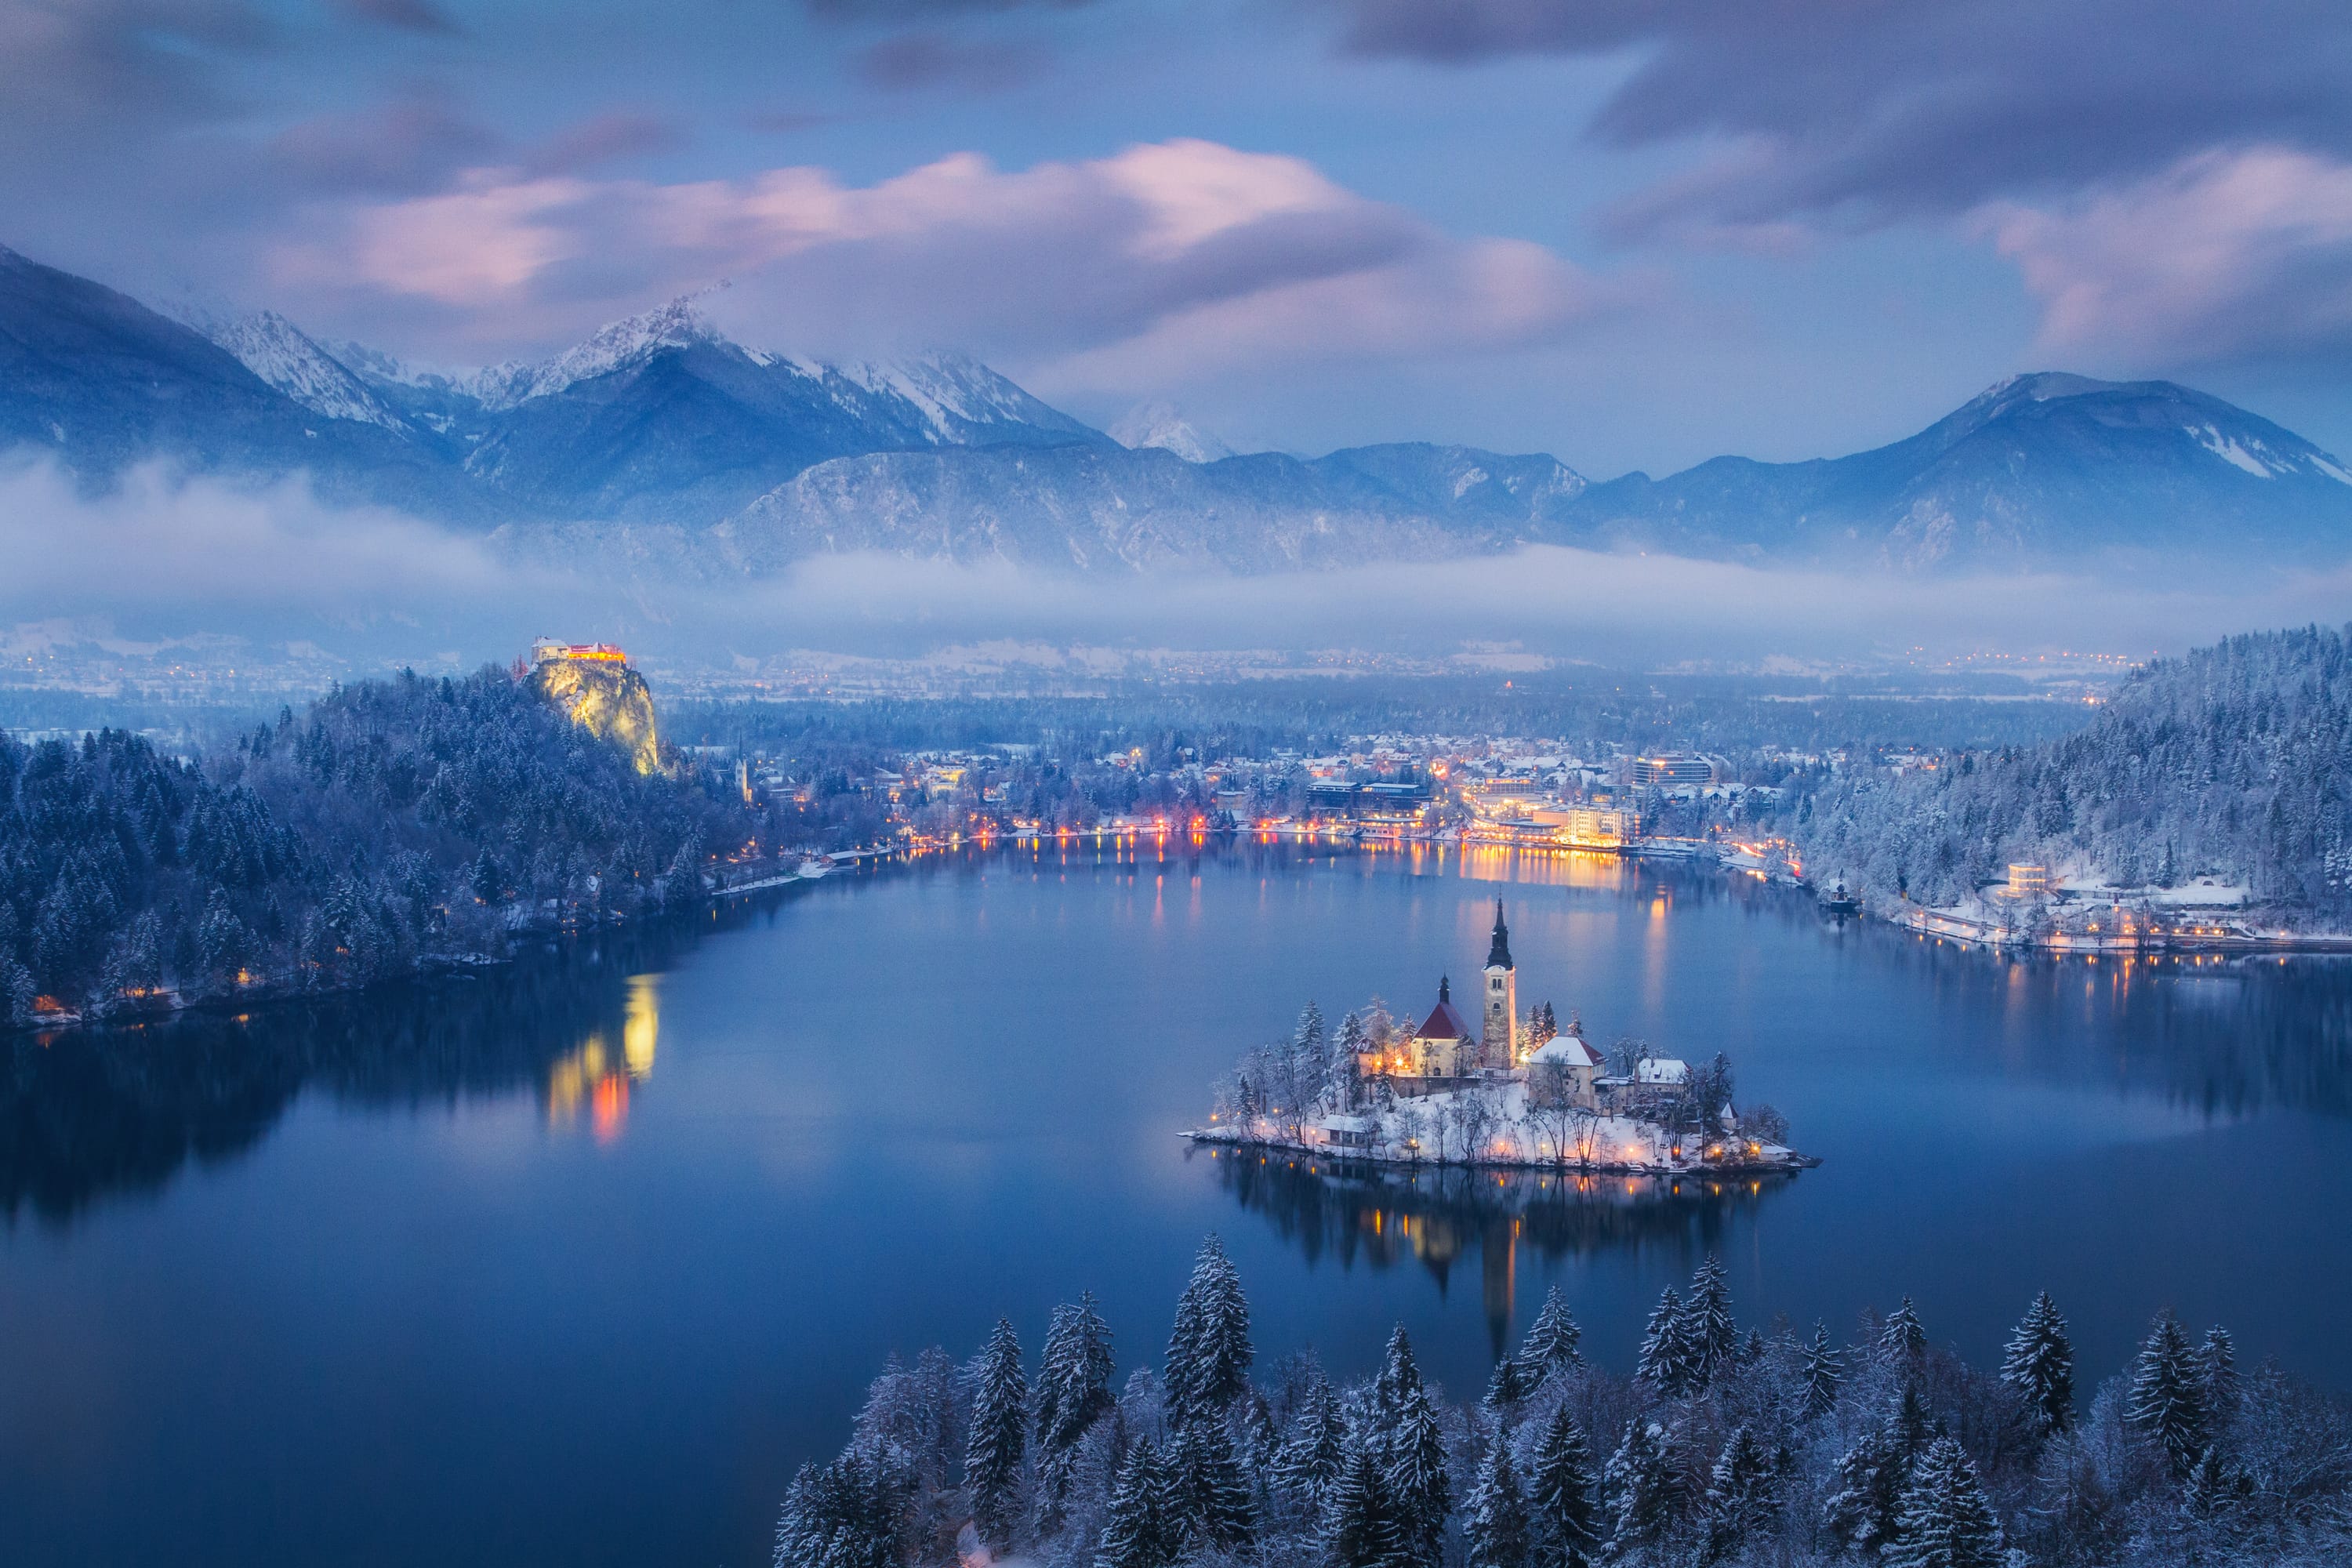 Lake Bled is the most photogenic lake in the world (Lonely Planet)